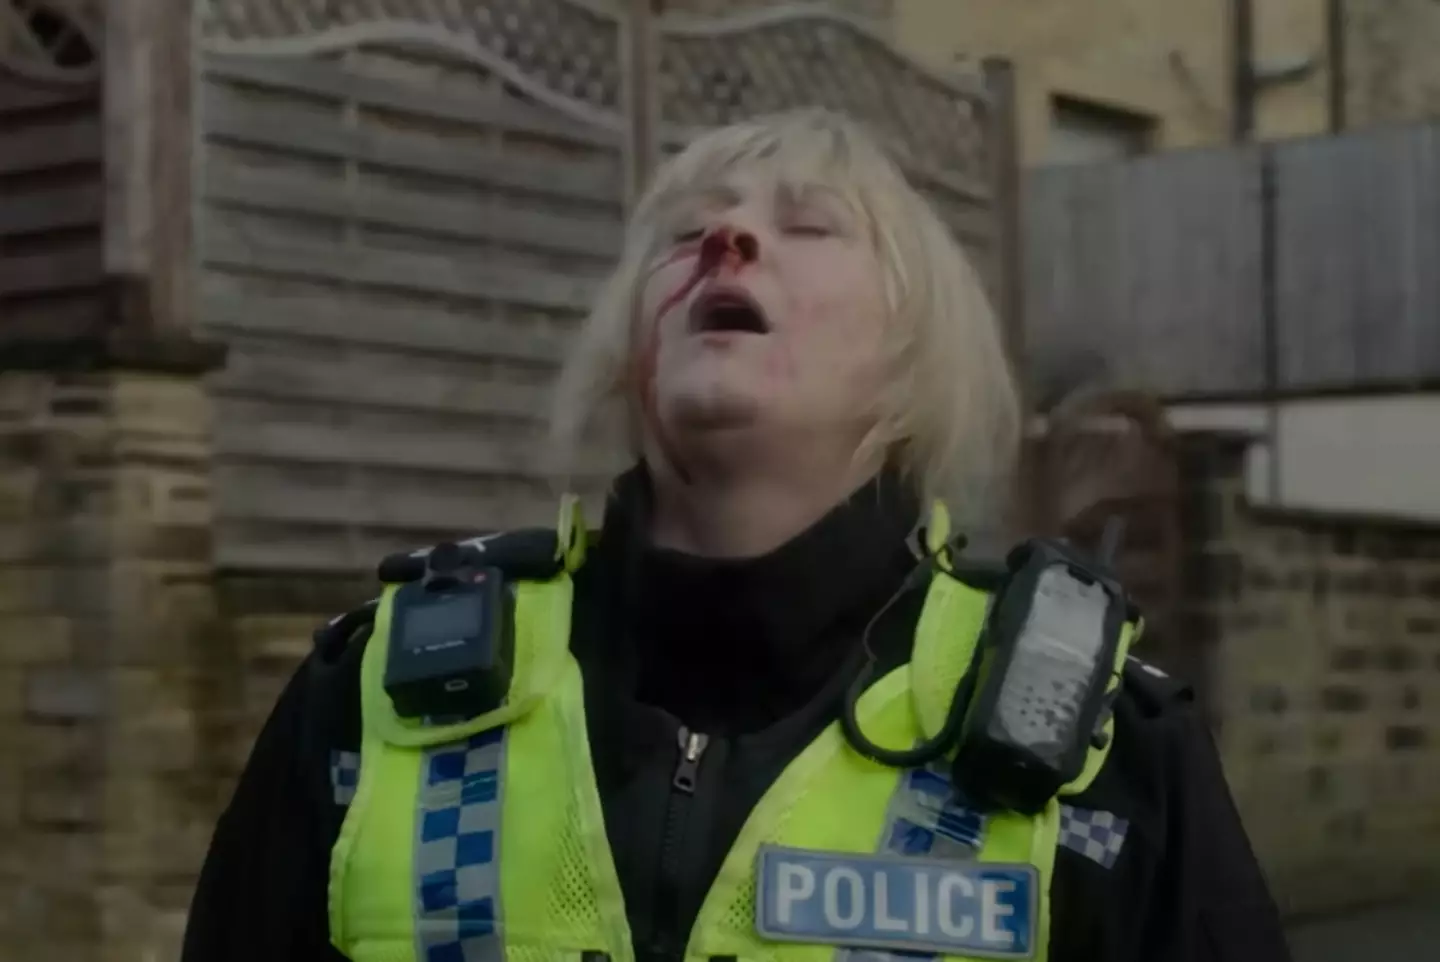 Happy Valley viewers were left in tears after seeing Sarah Lancashire as Catherine Cawood one last time.